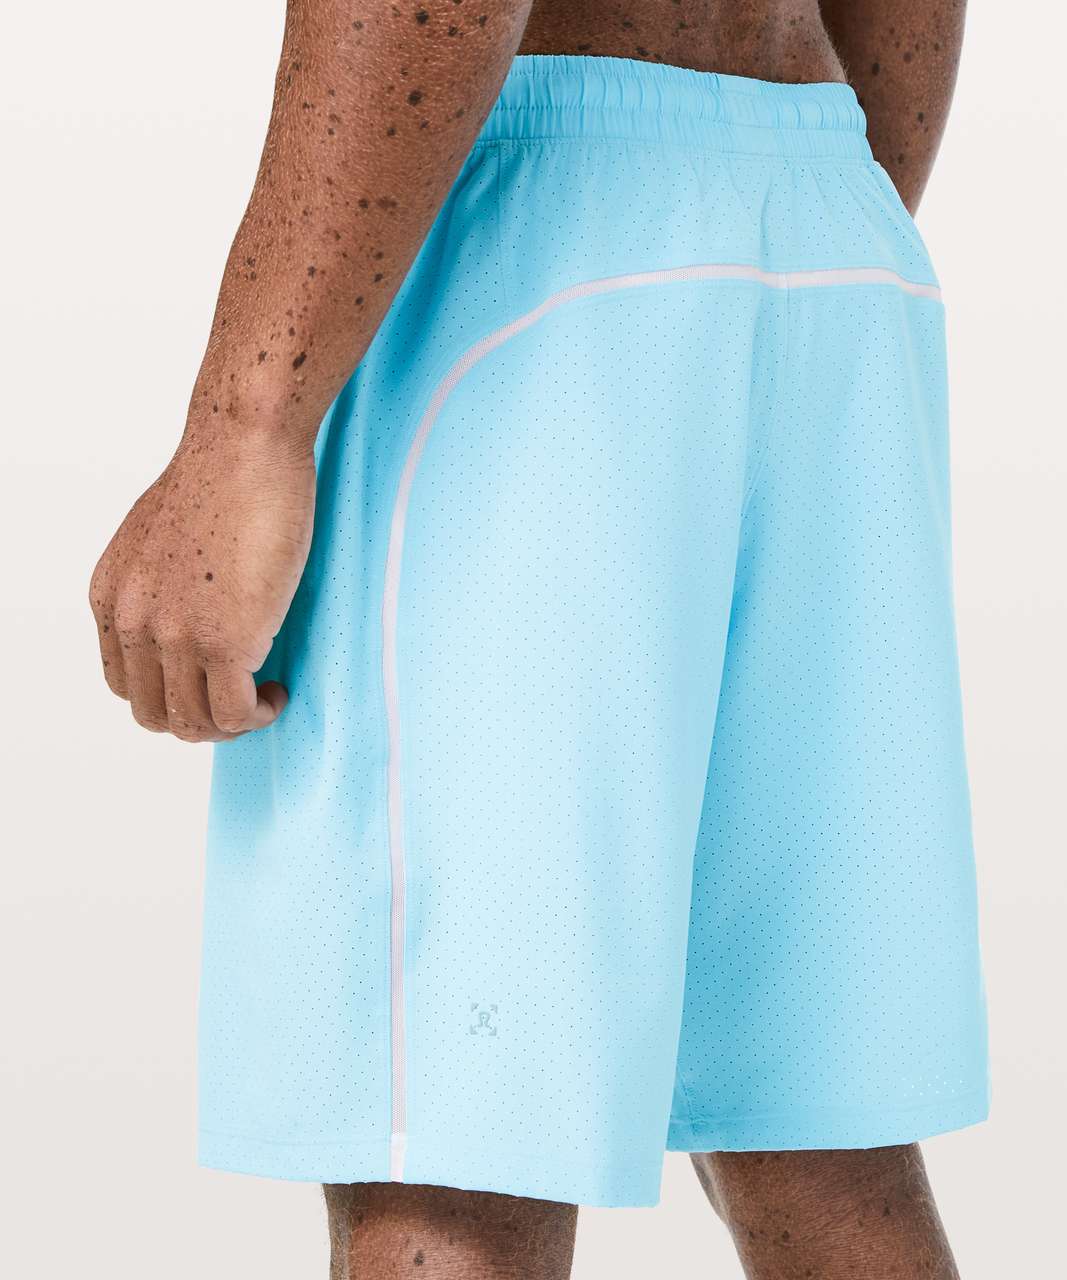 Lululemon Pace Breaker Short *Lined Perforated 9" - Light Water